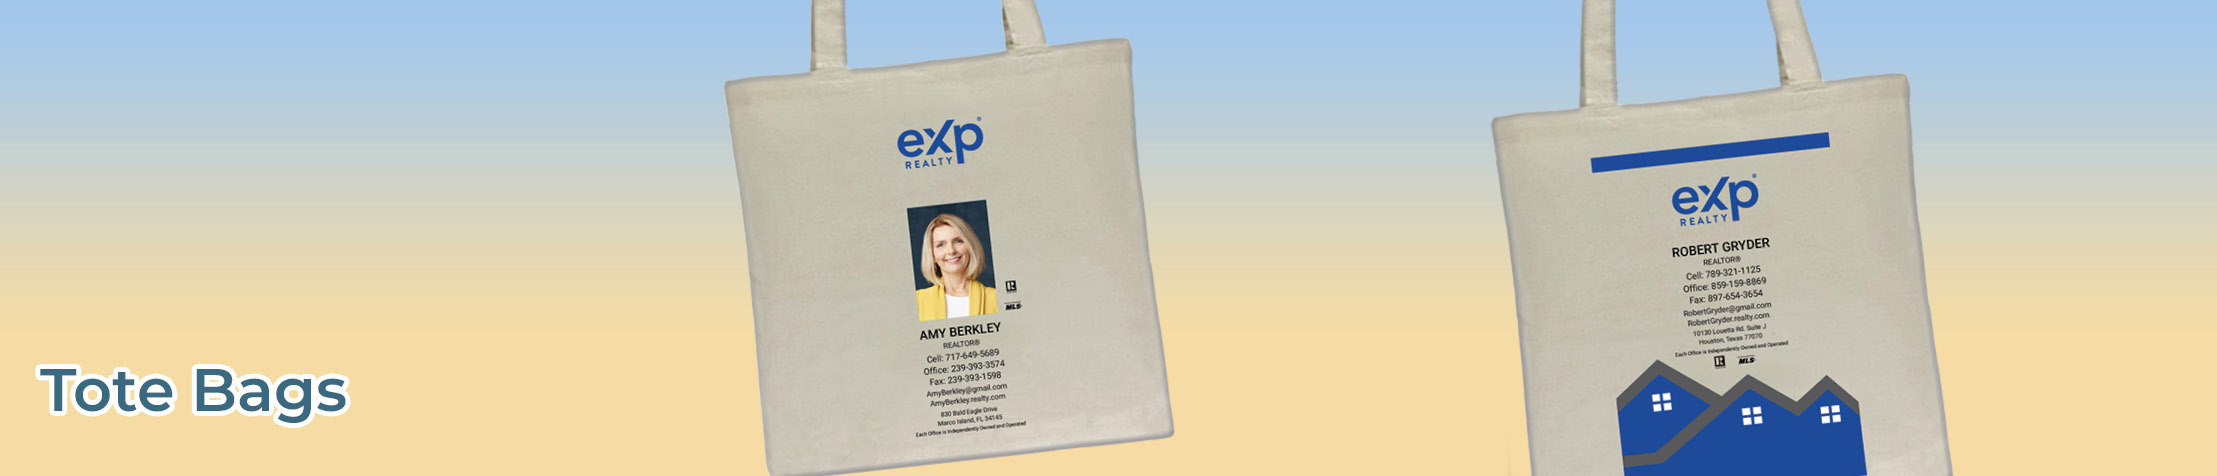 eXp Realty Real Estate Economy Can Cooler - eXp Realty  personalized realtor promotional products | BestPrintBuy.com